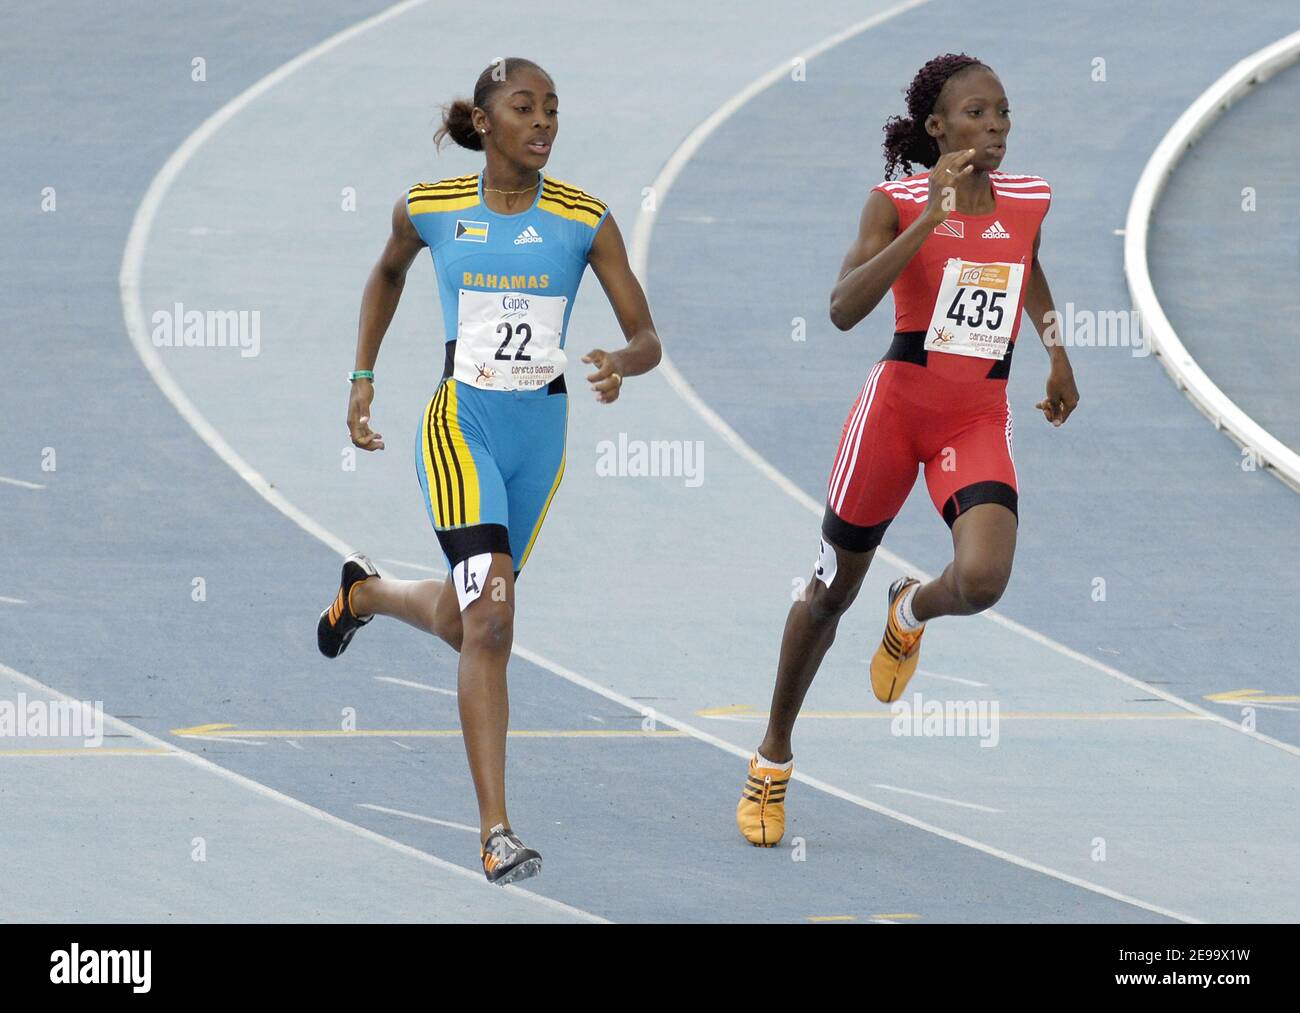 Bahamas' Cache Armbrister and Trinidad and Tobago's Janeil Bellille compete on women's 400 meters during the Carifta Games, at Rene Serge Nabajoth stadium in Les Abymes, near Pointe-a-Pitre, Guadeloupe, on April 15, 2006. Photo by Nicolas Gouhier/CAMELEON/ABACAPRESS.COM Stock Photo